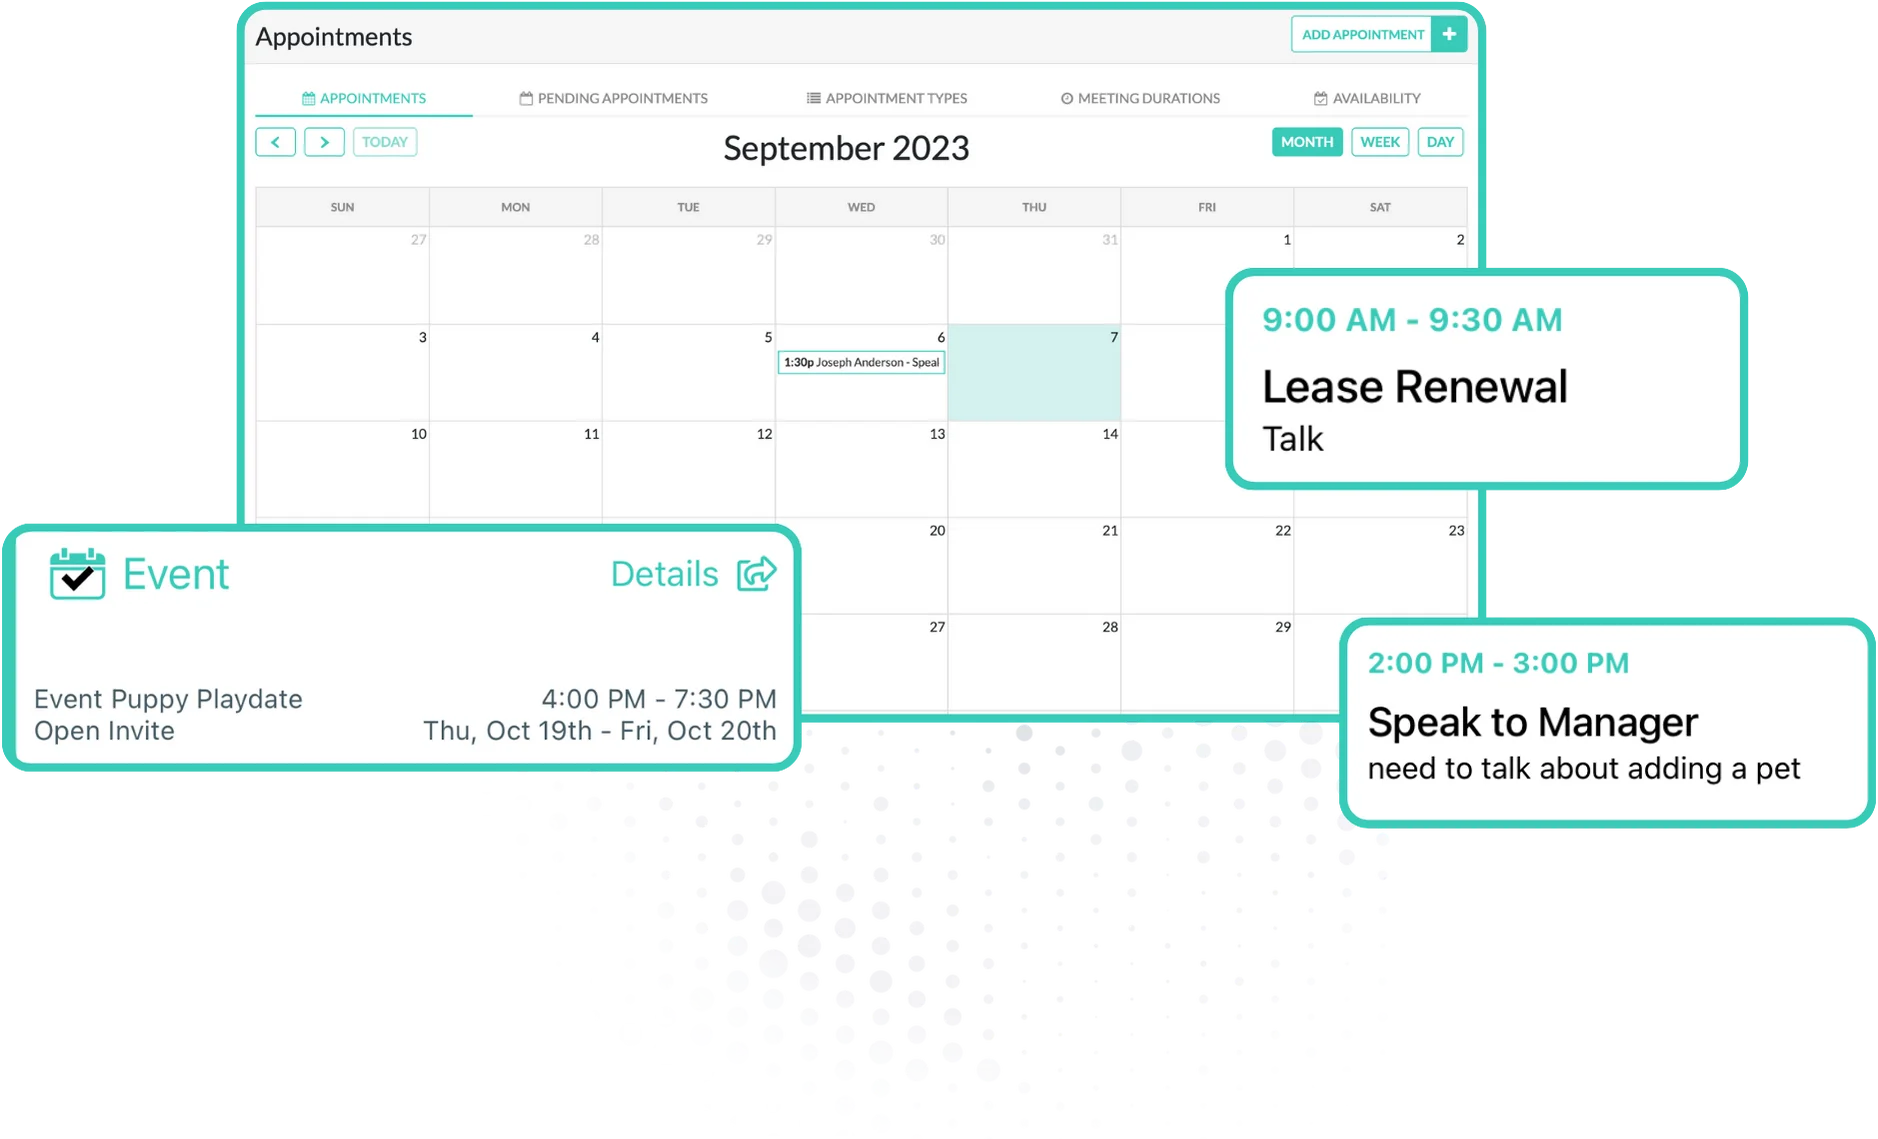 Calendar showing Henri's appointments feature